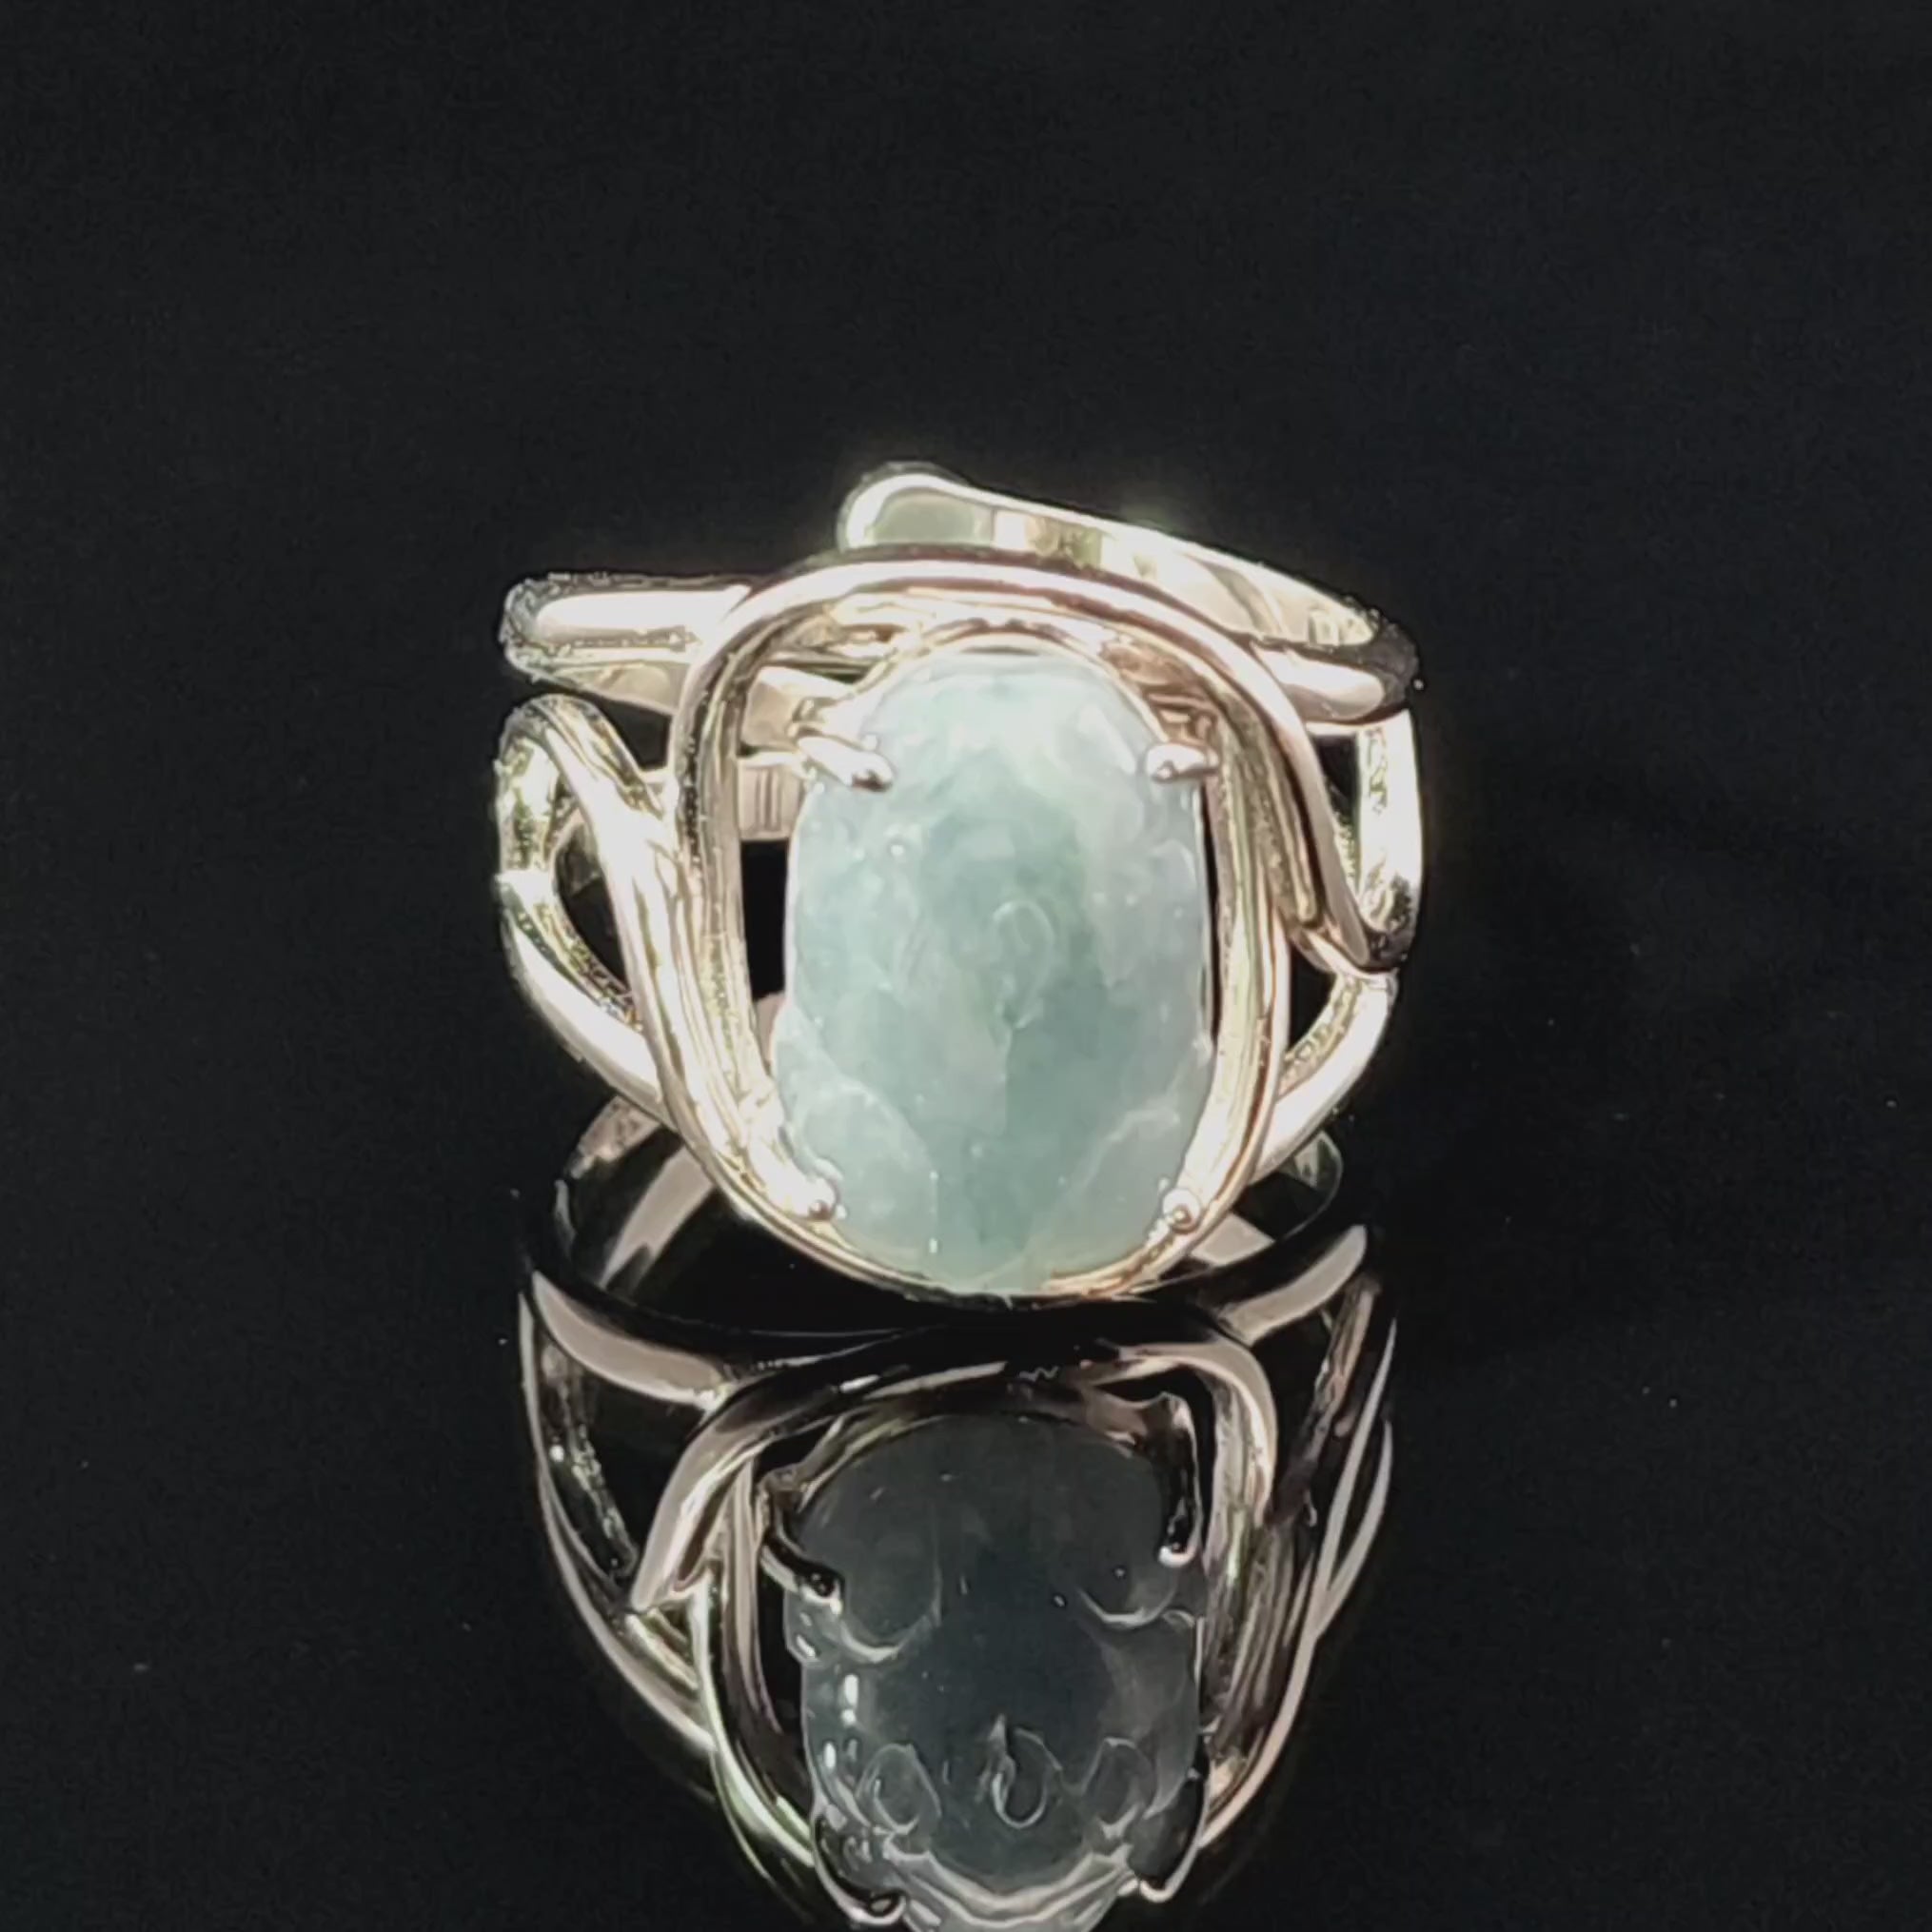 Blue Jadeite Pixiu Finger Cuff Adjustable Ring .925 Silver for Spiritual Awareness, Prosperity and Protection